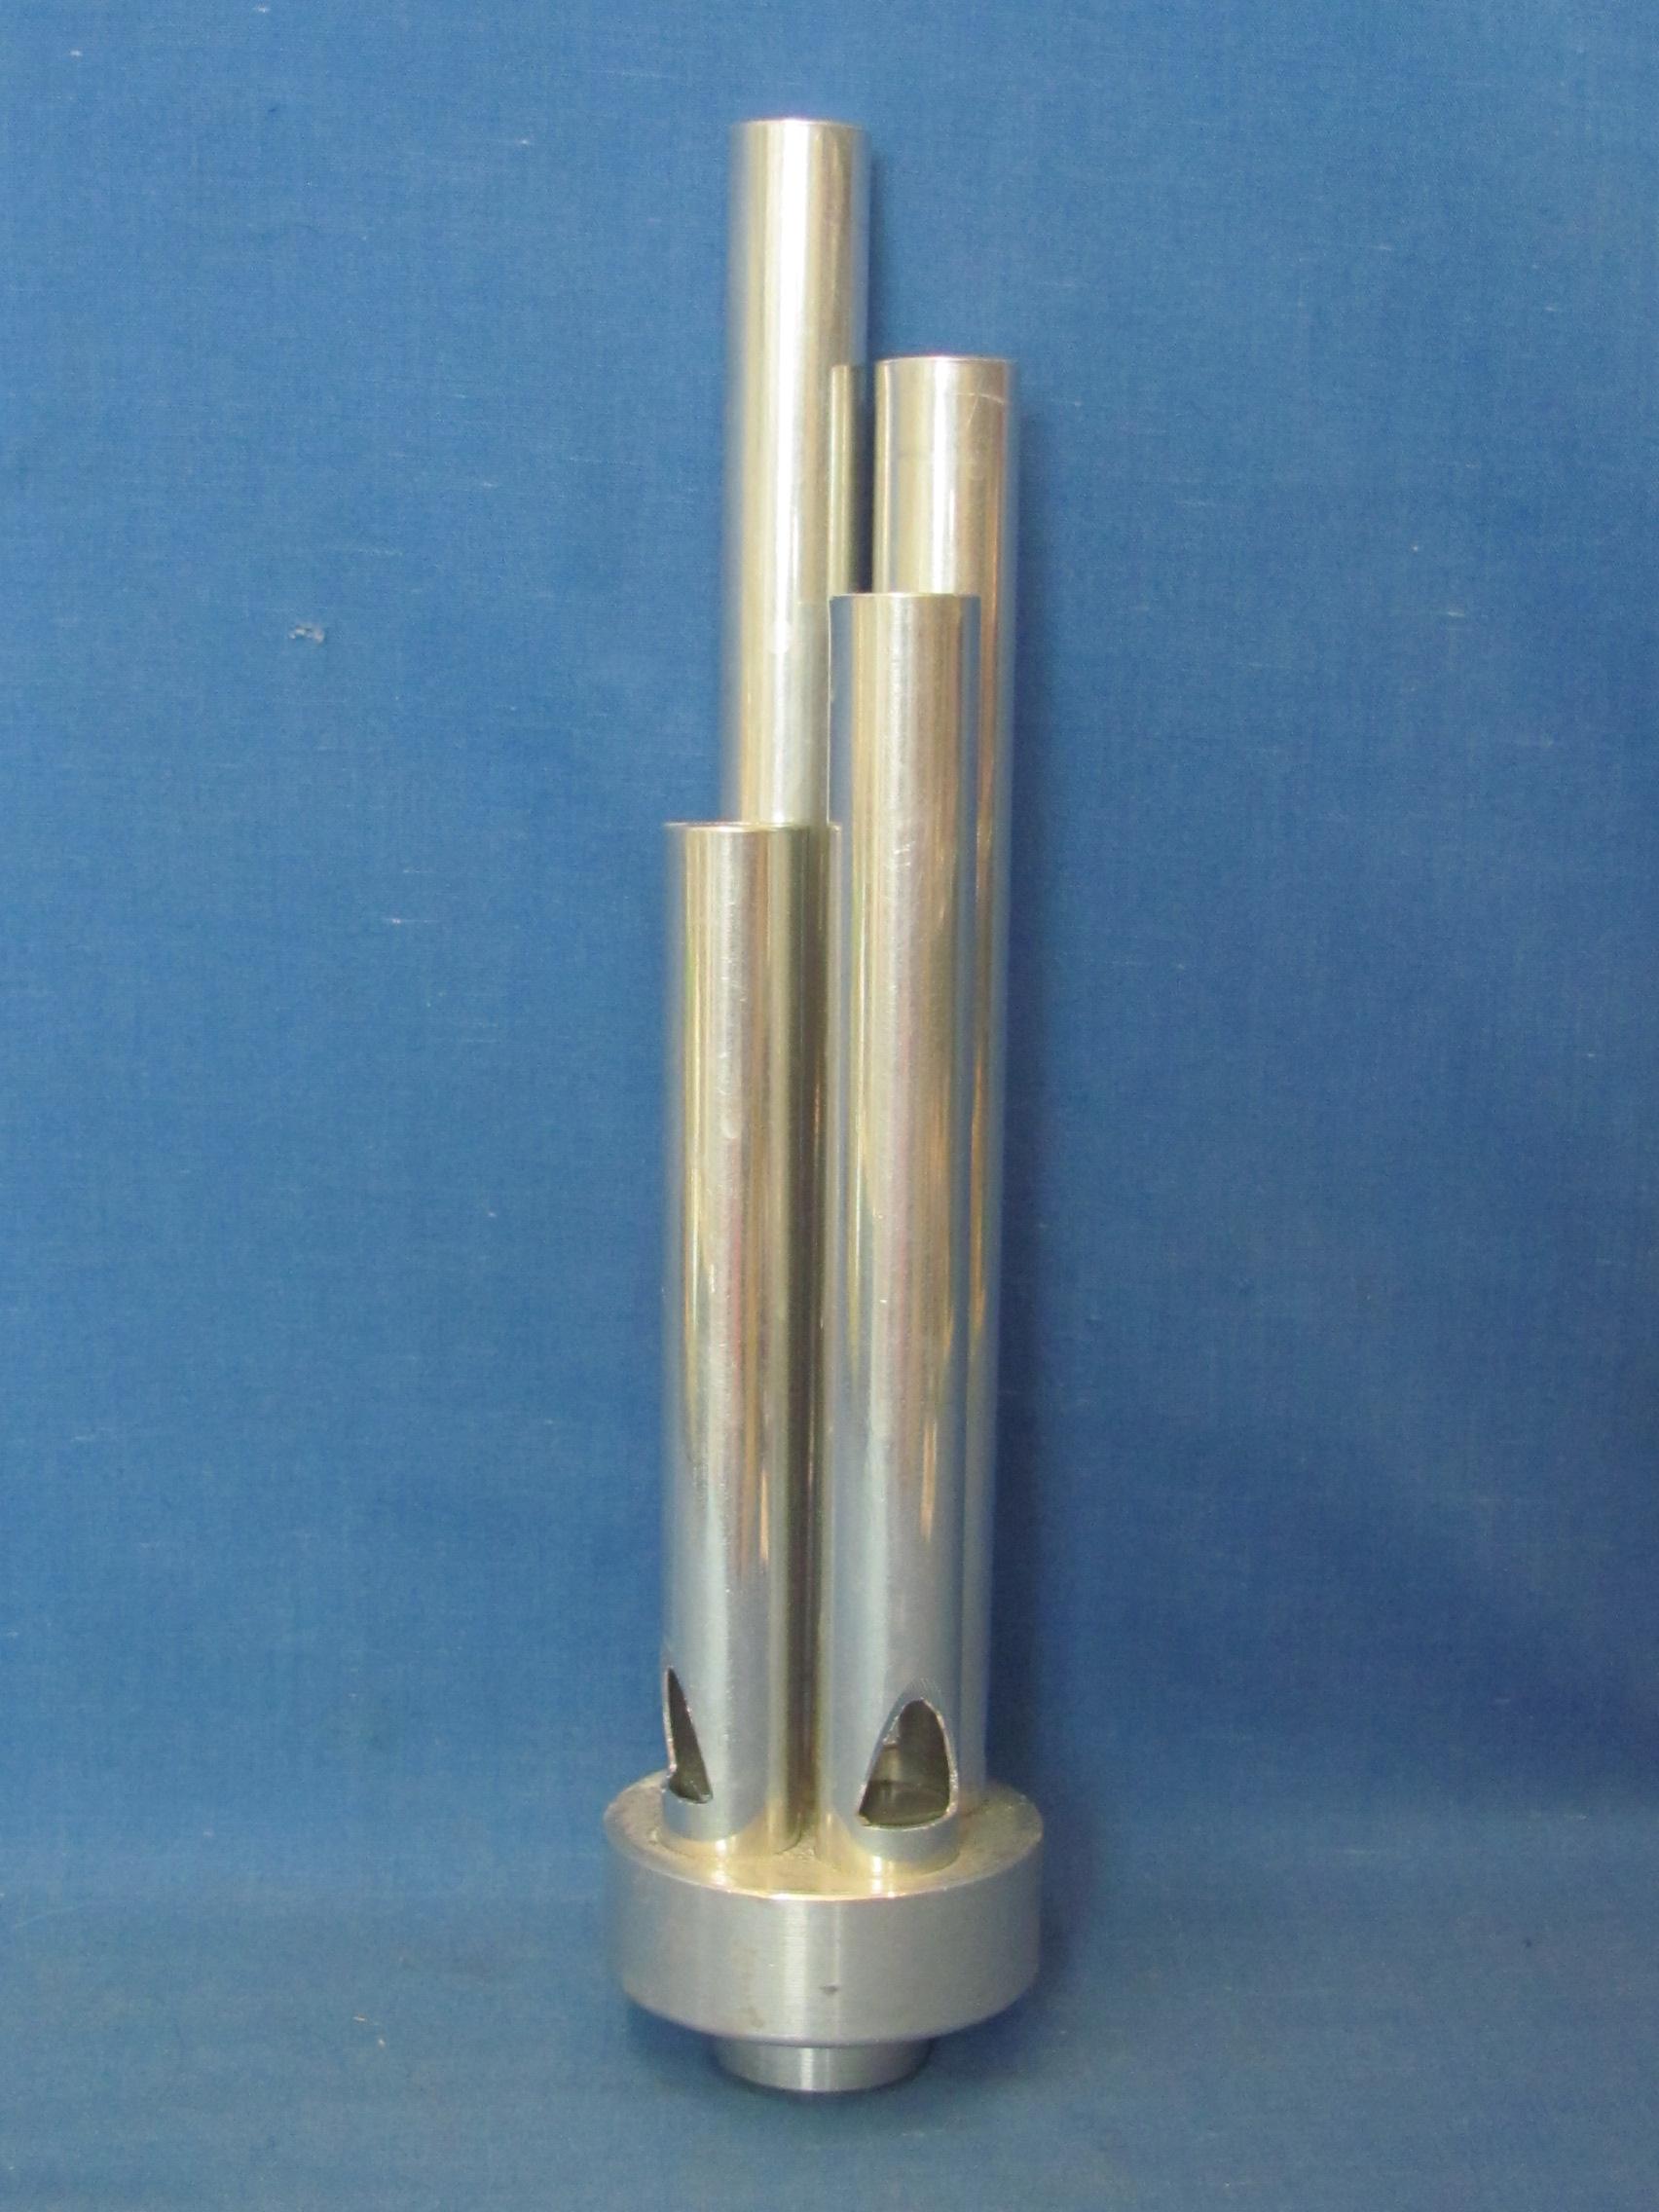 4 Pipe Aluminum Train/Steam Whistle – 8 1/2” long – Marked with a D